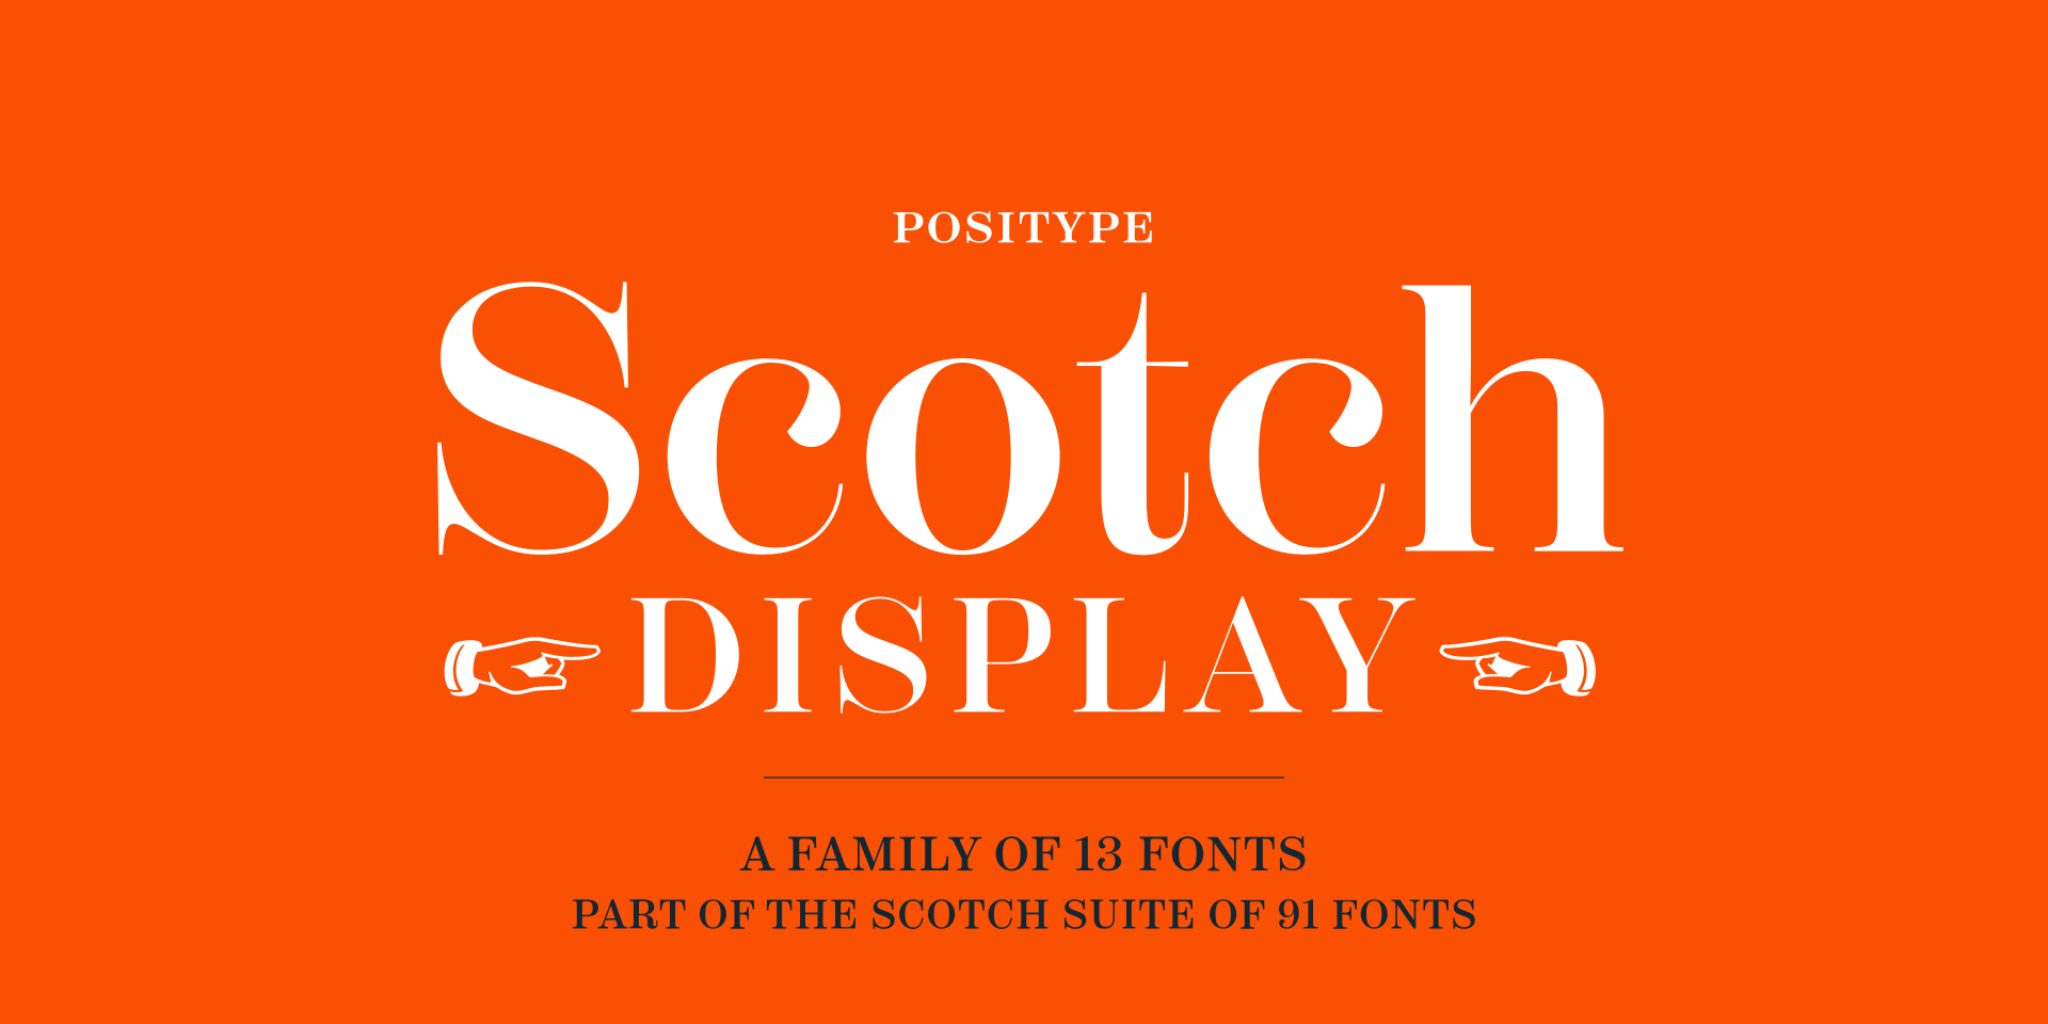 Example font Scotch Genovese Display #1